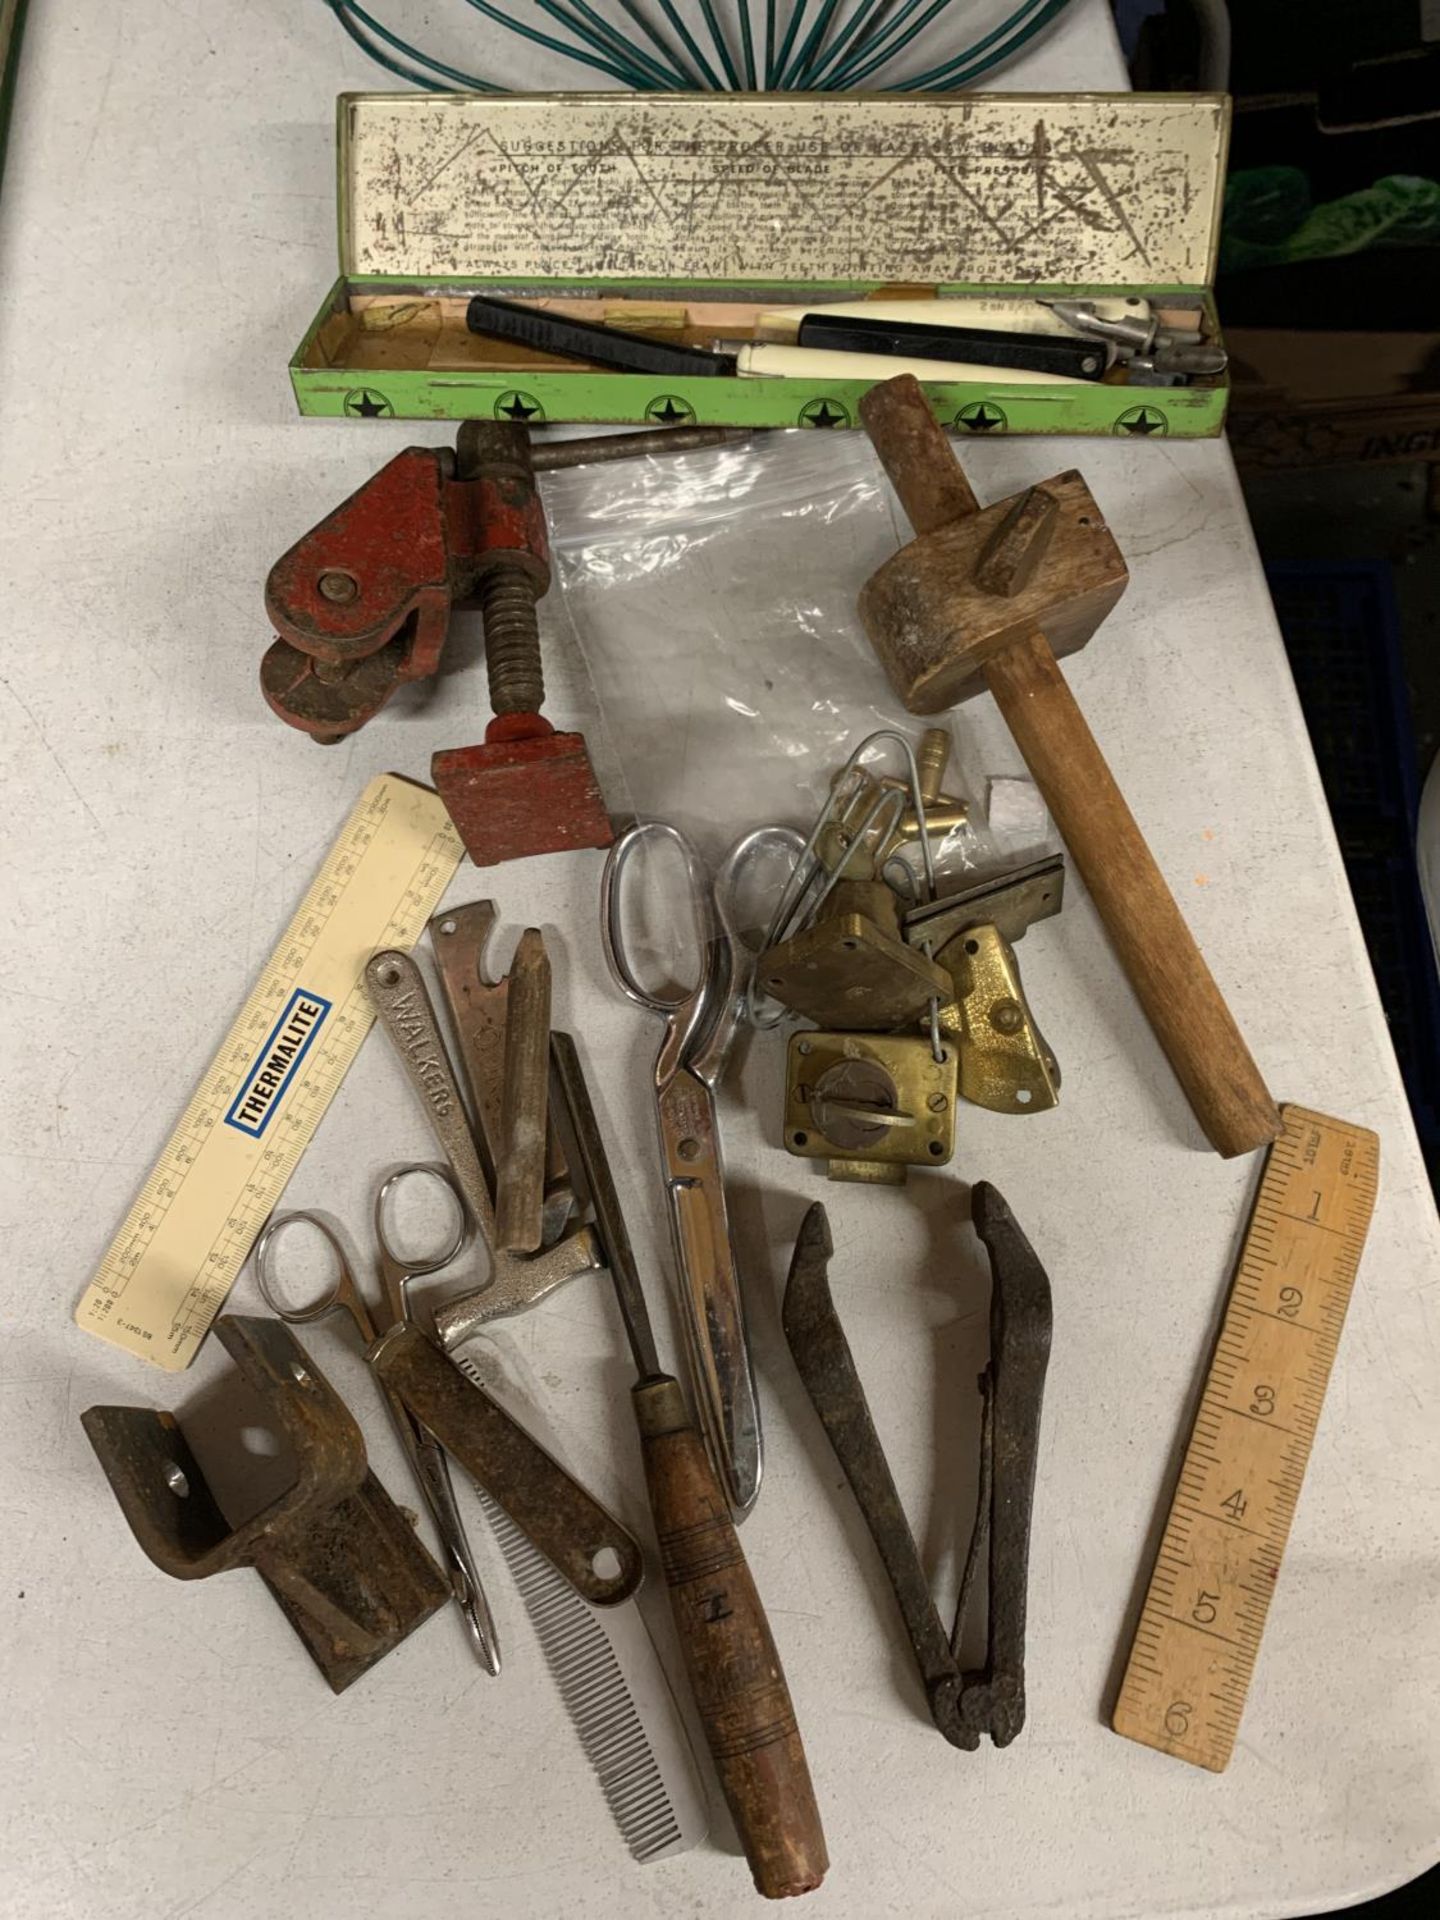 A QUANTITY OF VINTAGE TOOLS - Image 2 of 3